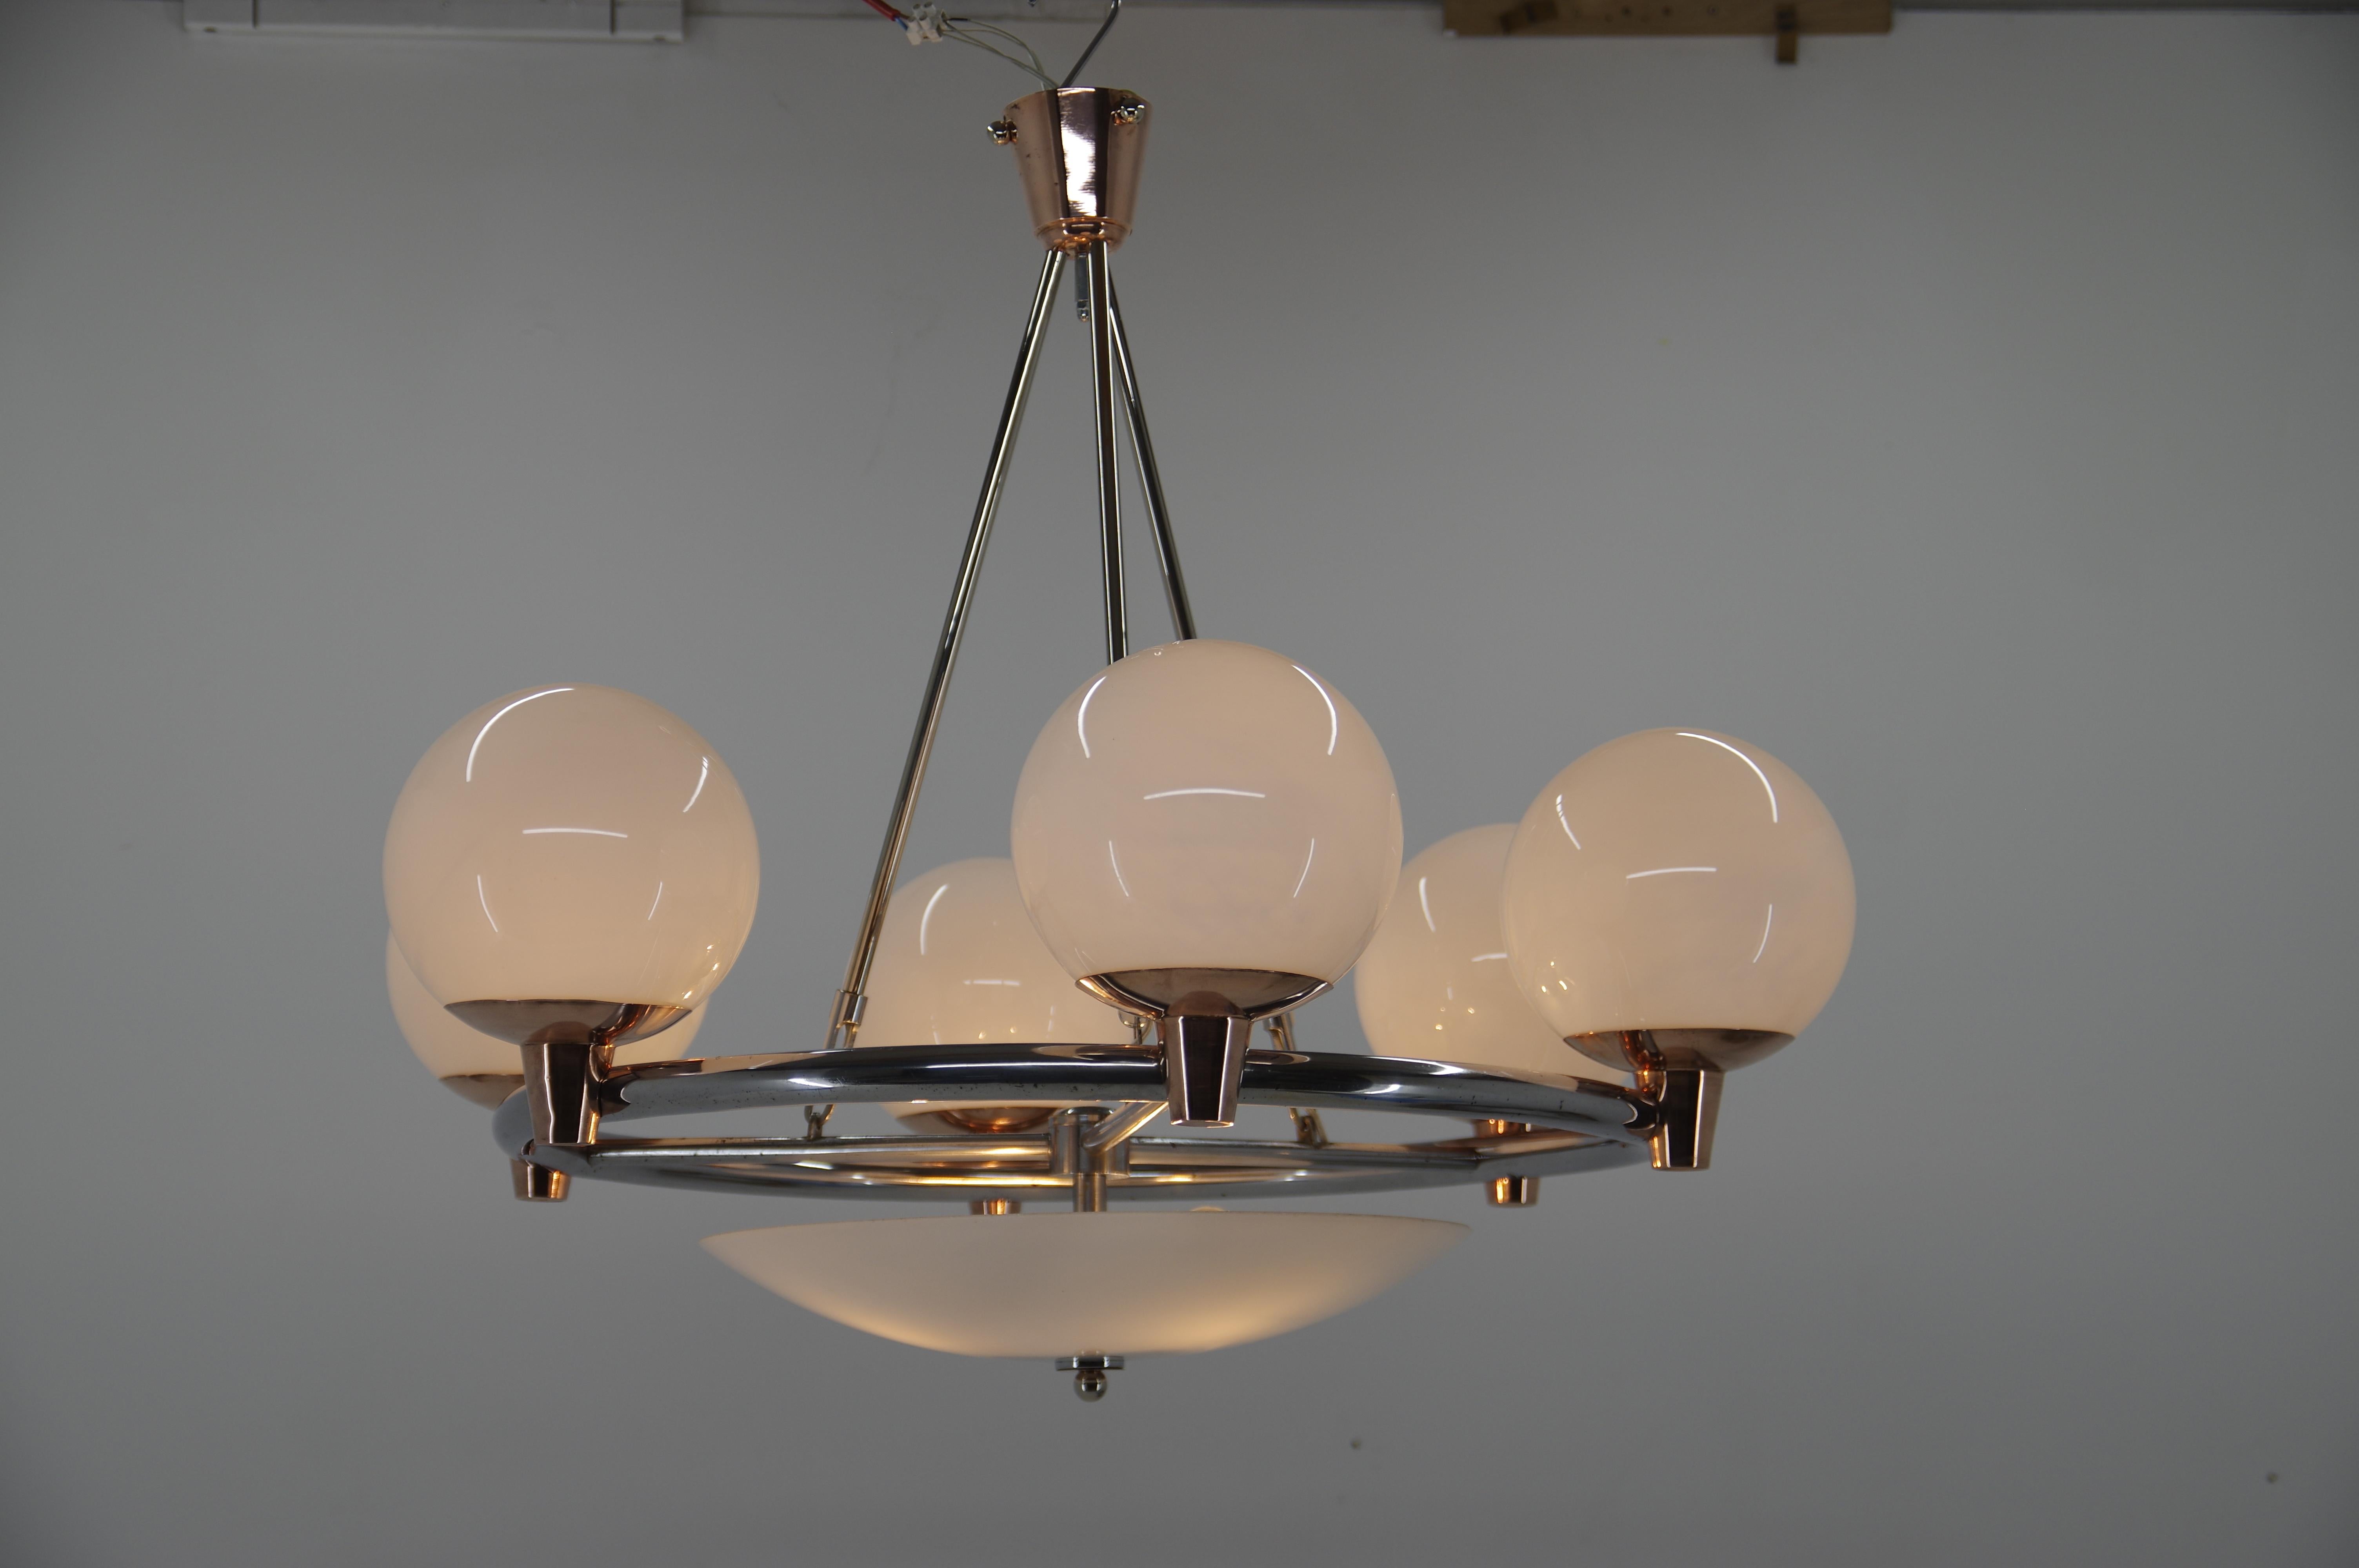 9-flamming Art Deco chandelier with beautiful combination of chrome and copper plating.
Restored: chrome with age patina polished, copper polished, rewired: two separate circuits.
Bottom circuits with three original E25-E27 sockets
Upper circuits